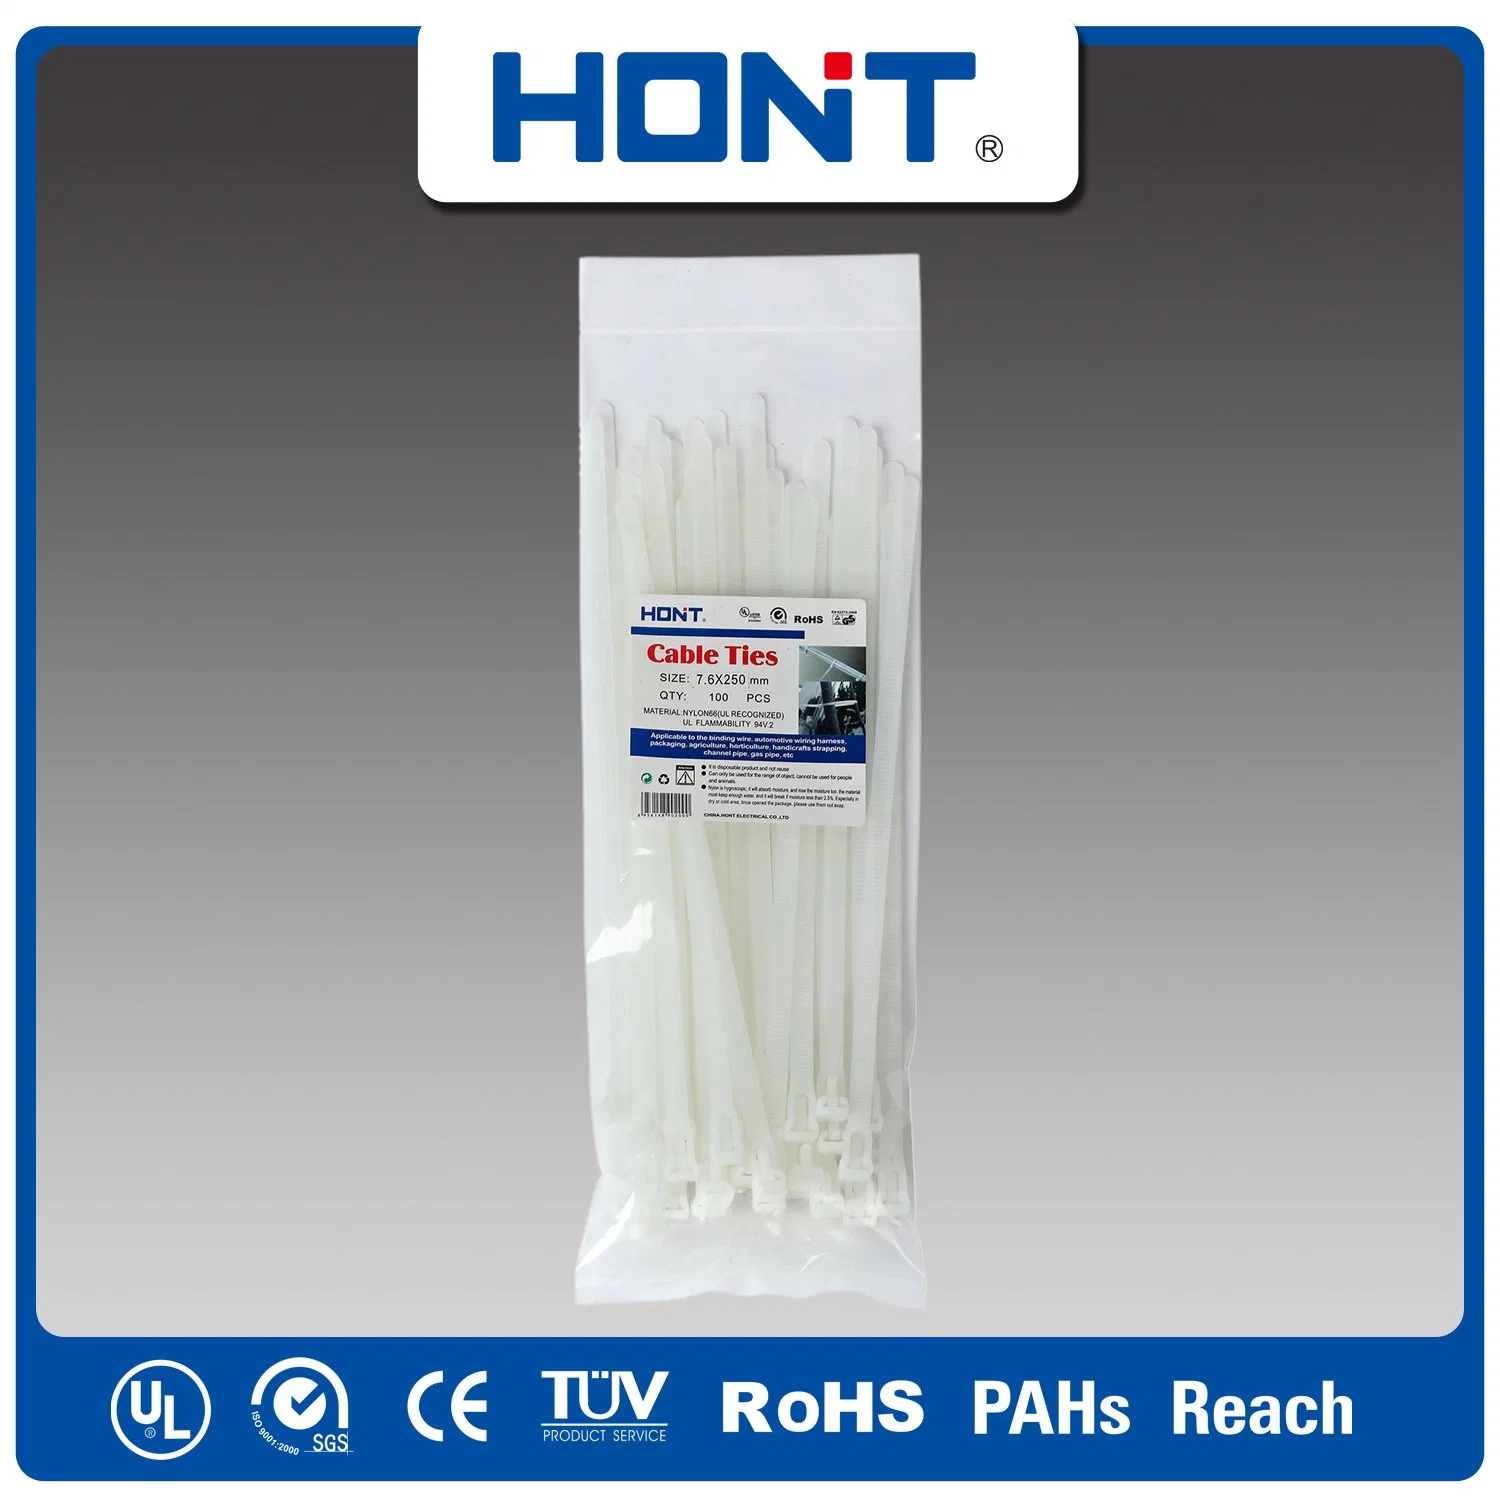 94V2 Hont Plastic Bag + Sticker Exporting Carton/Tray Self-Locking Tie Cable Accessories with CCC